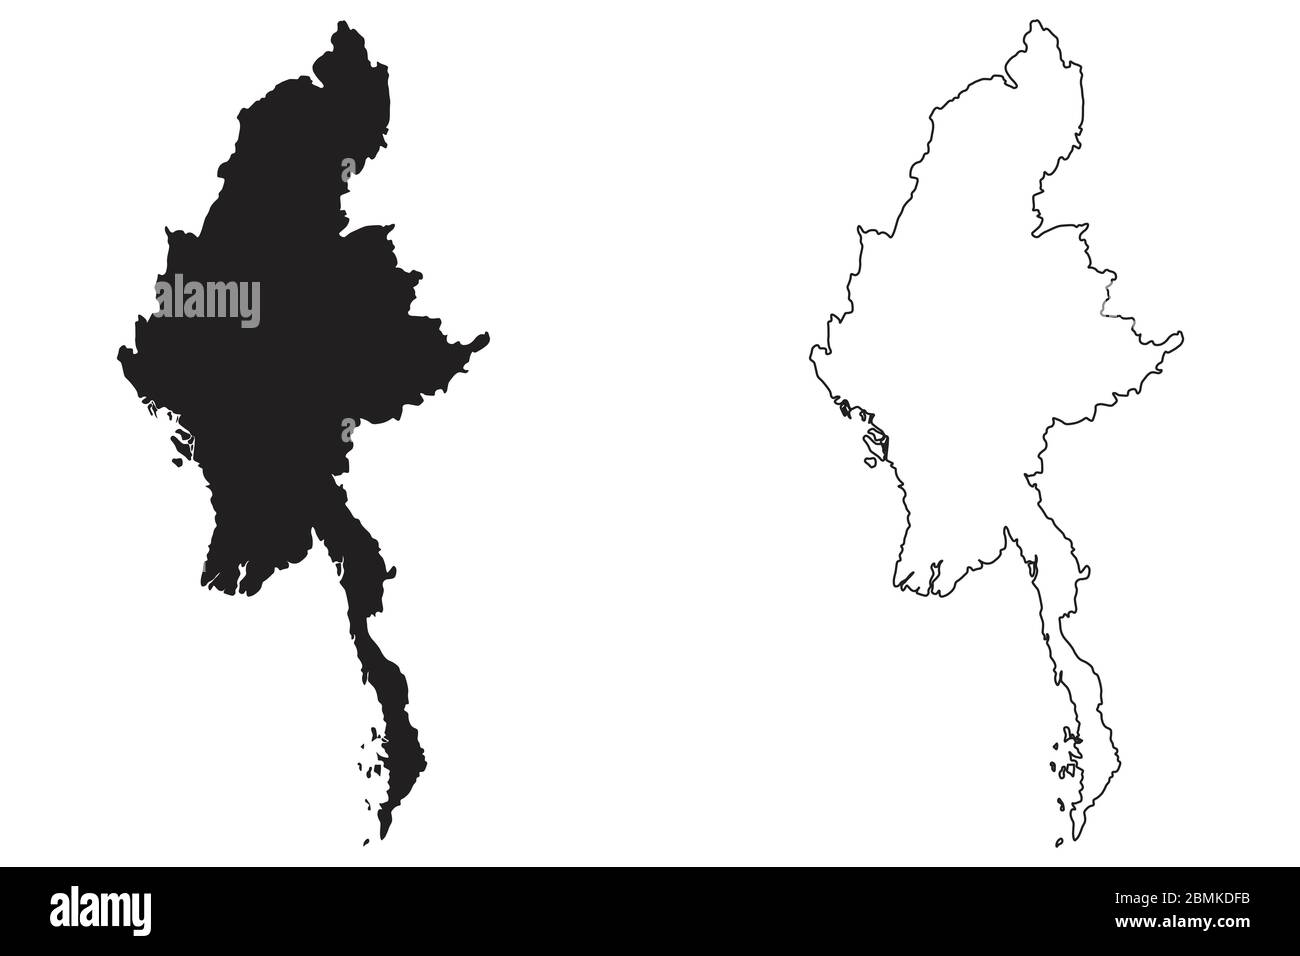 Myanmar Country Map. Black silhouette and outline isolated on white background. EPS Vector Stock Vector